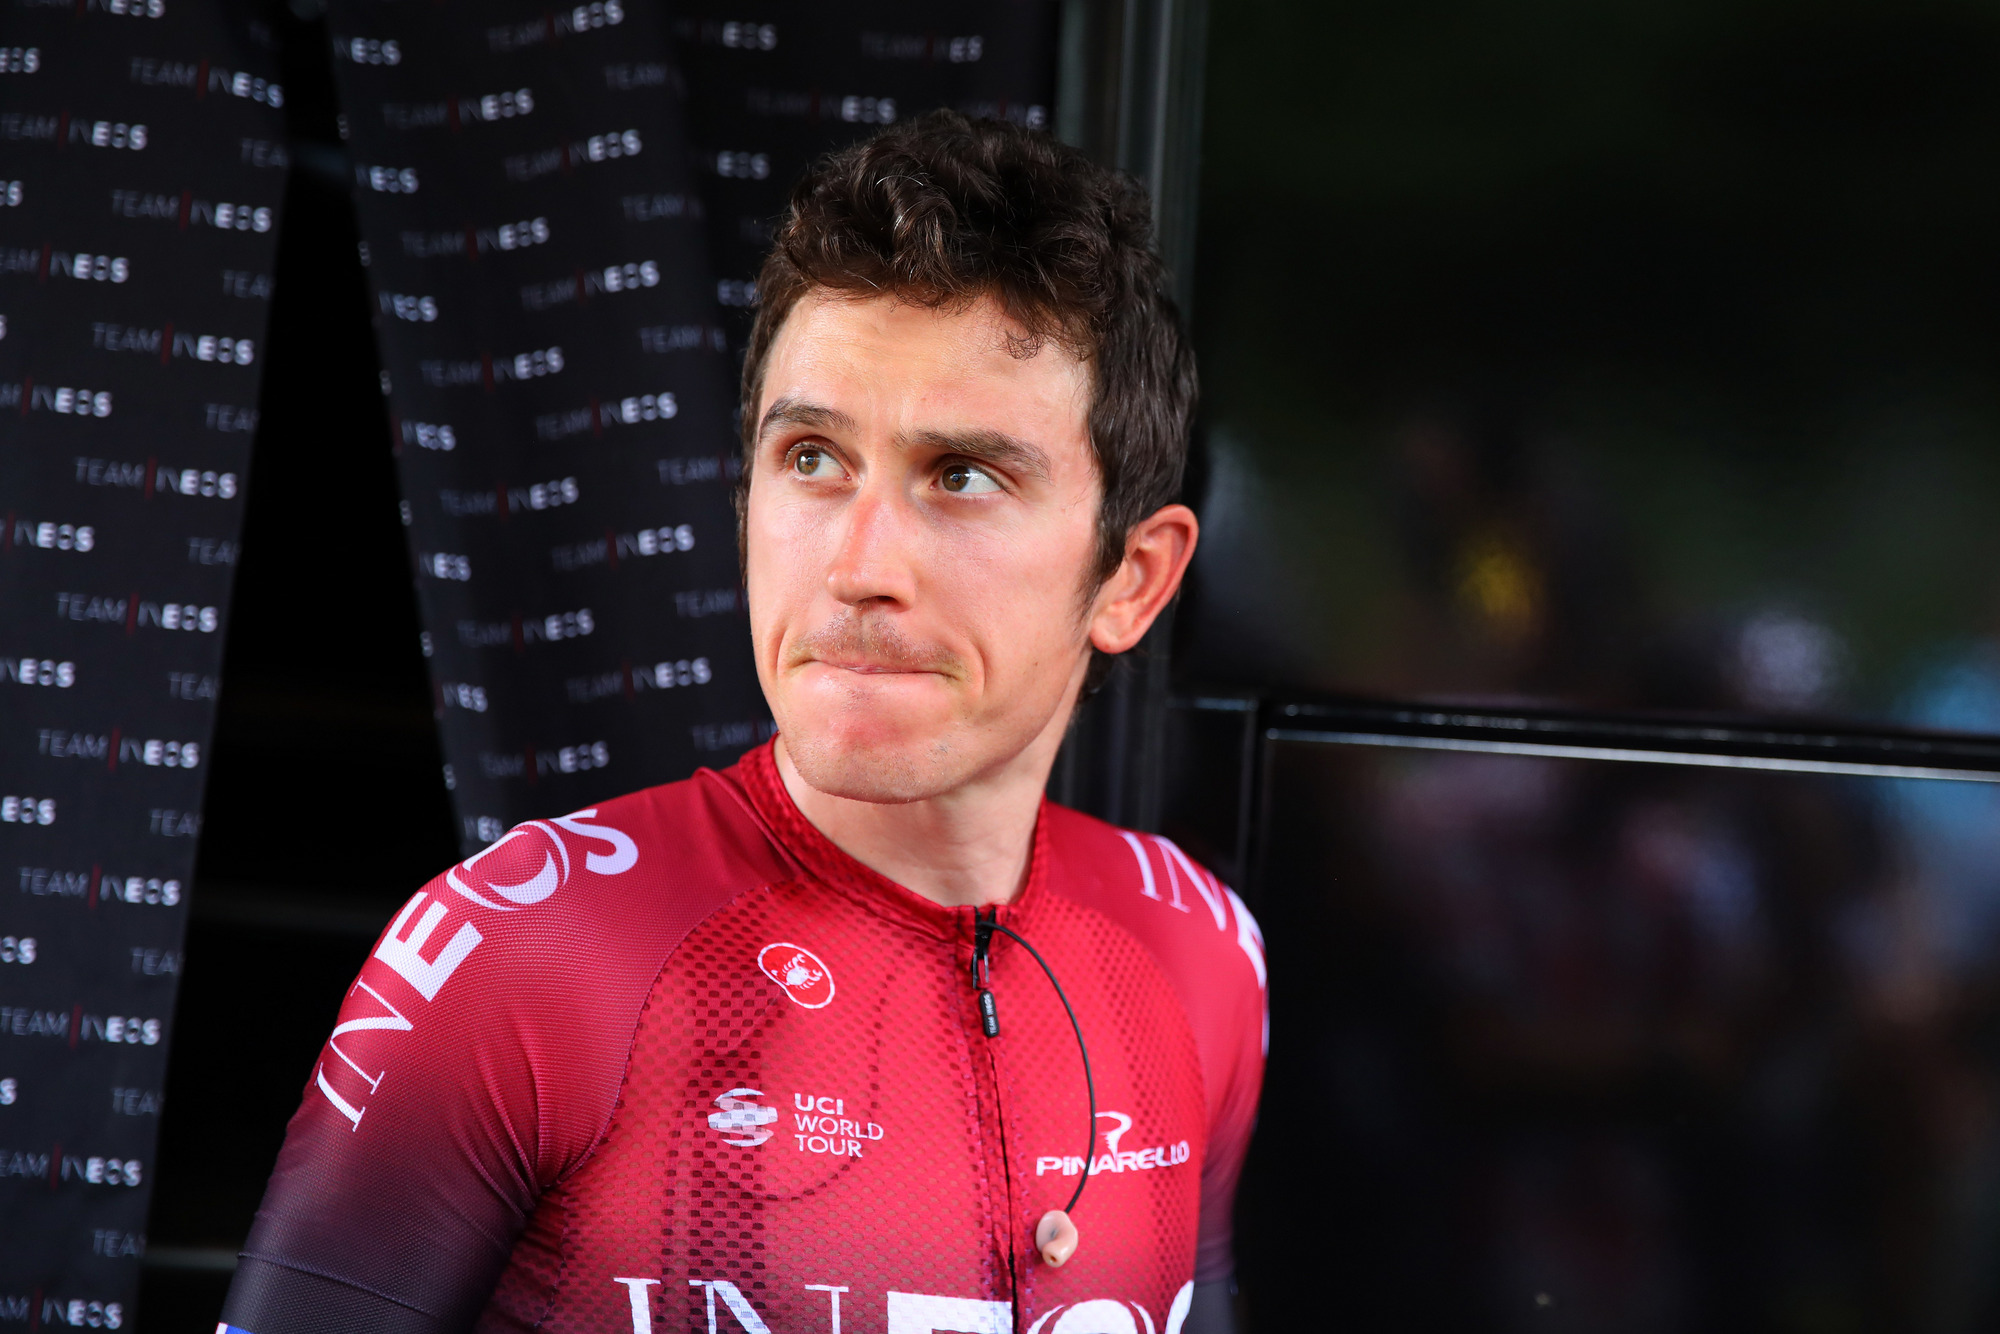 Geraint Thomas raises £325,000 for NHS after 36 hours on the home